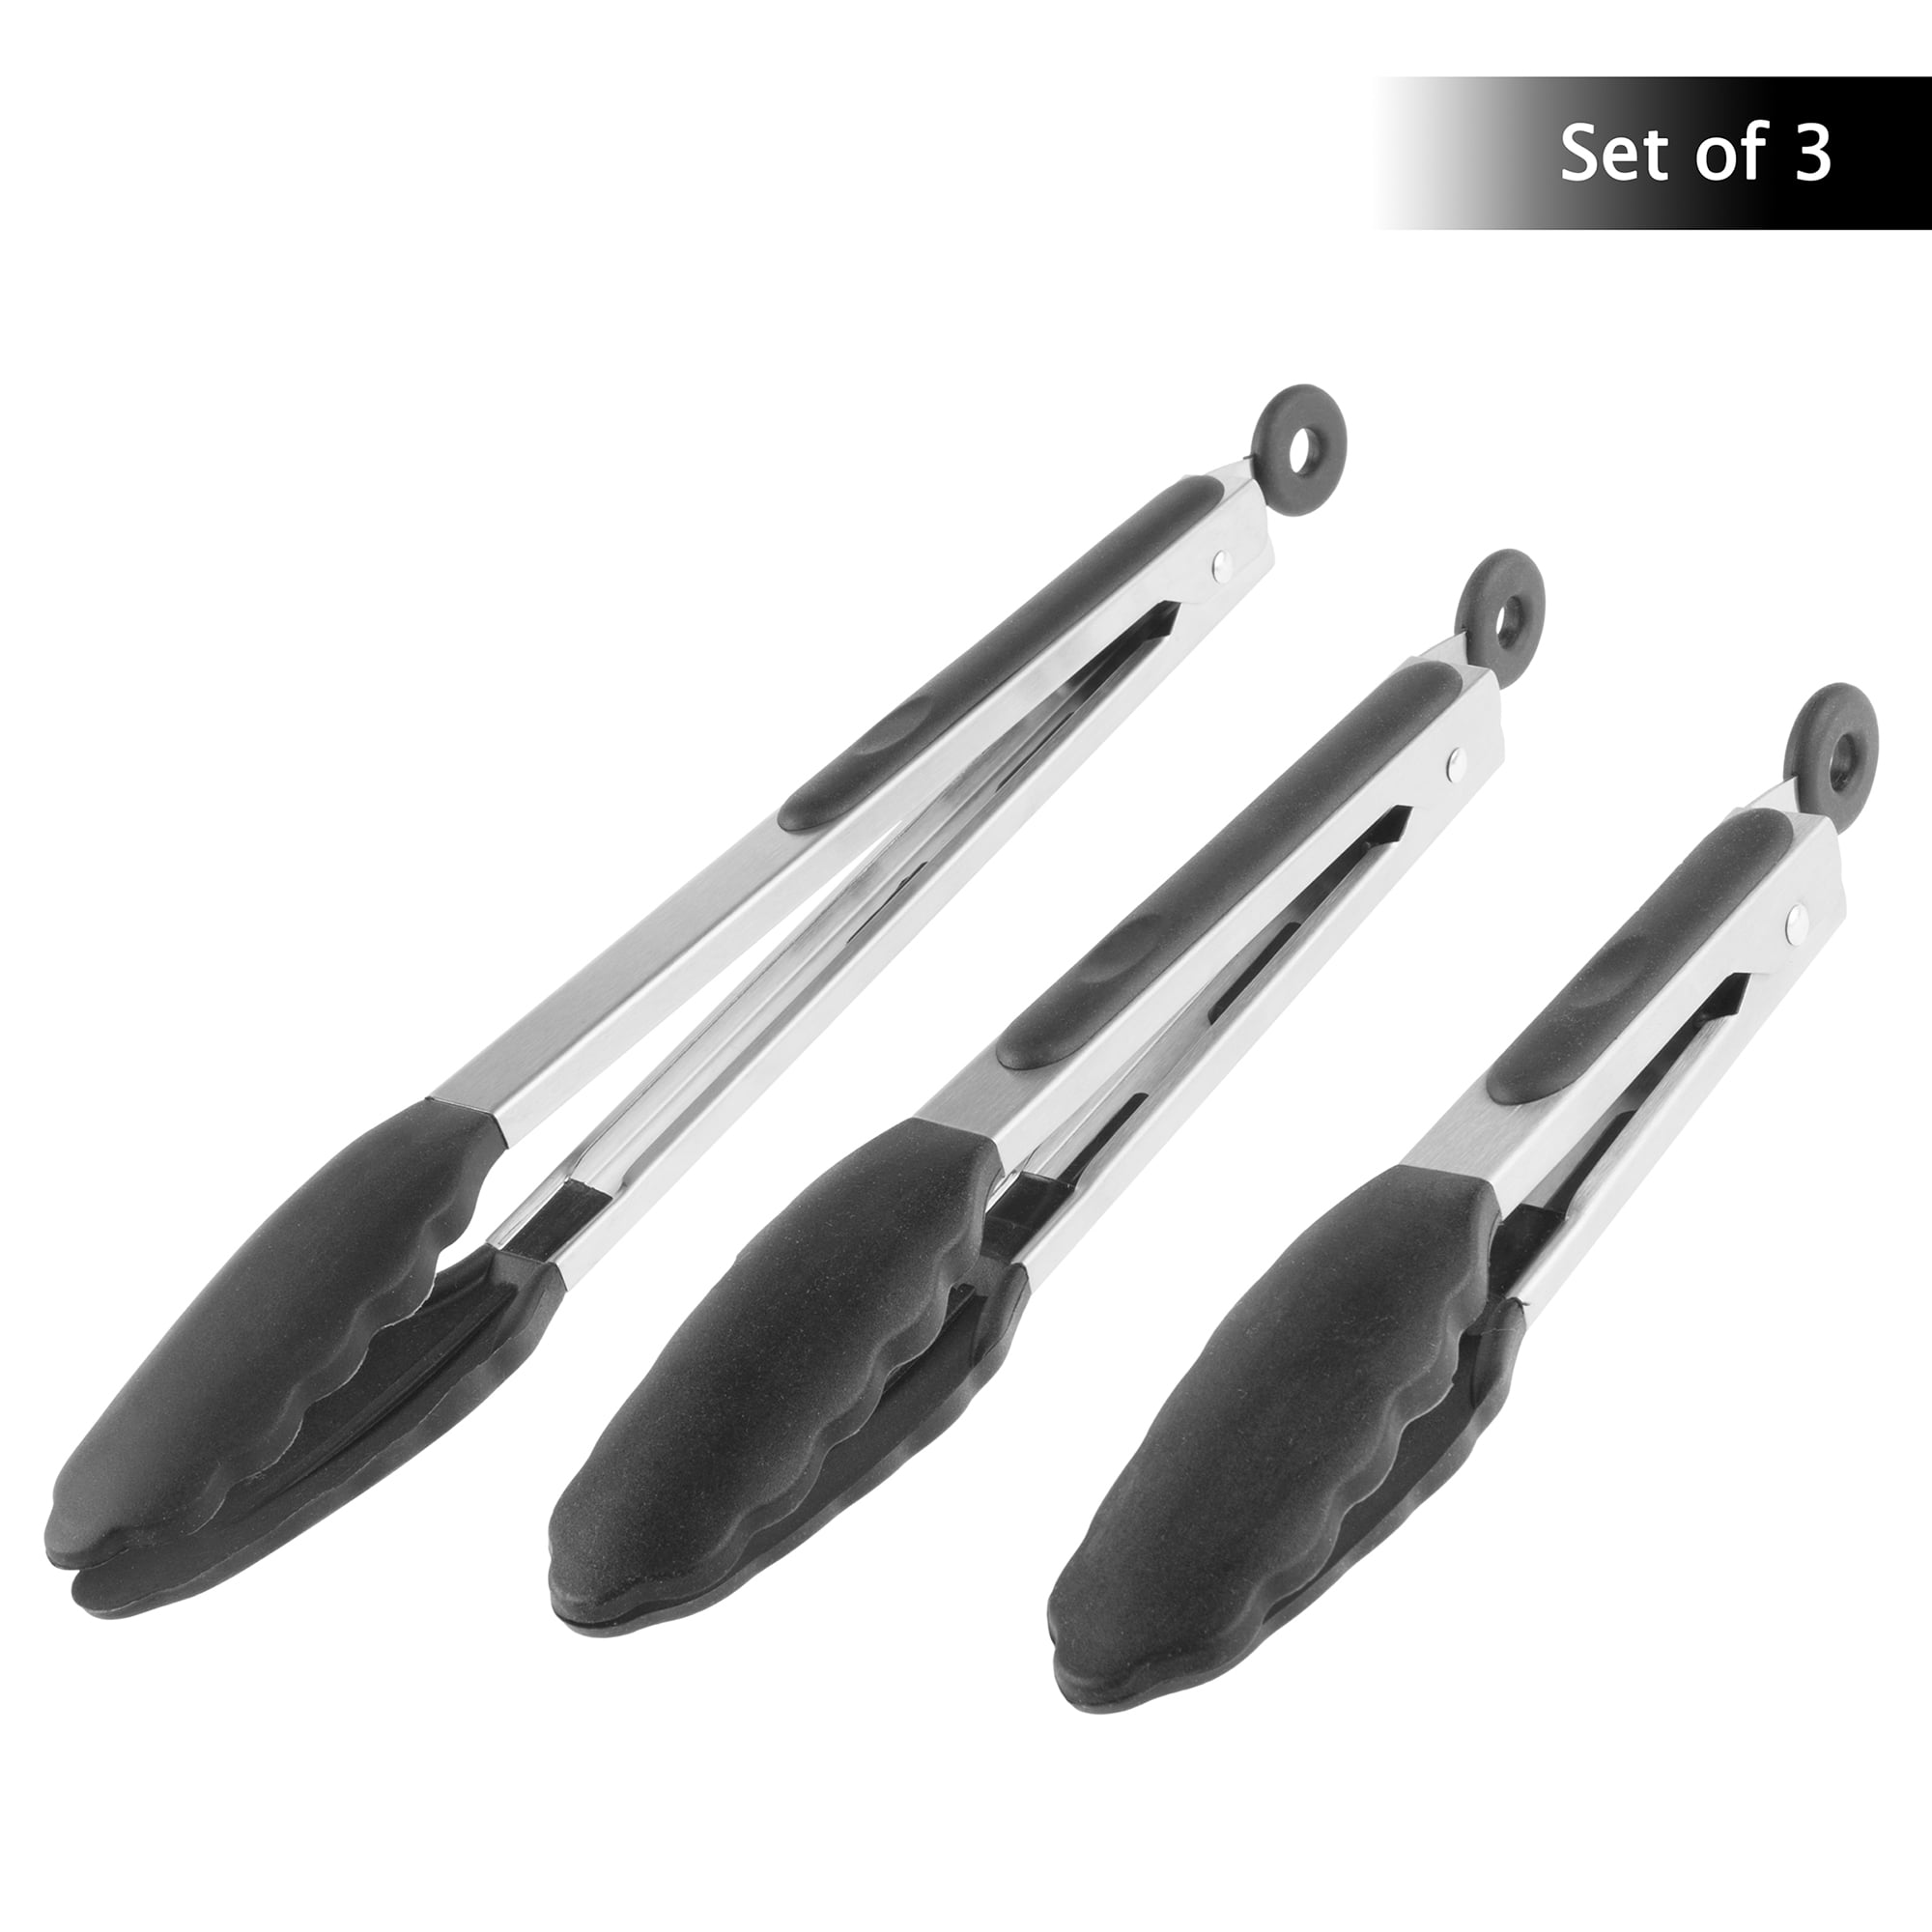 3 black silicone tongs Walfos Kitchen Tongs Stainless Steel and BPA Free Silicone Tips 7 9 and 12 Grilling Turning Great for Cooking Heat Resistant Cooking Tongs Set of 3